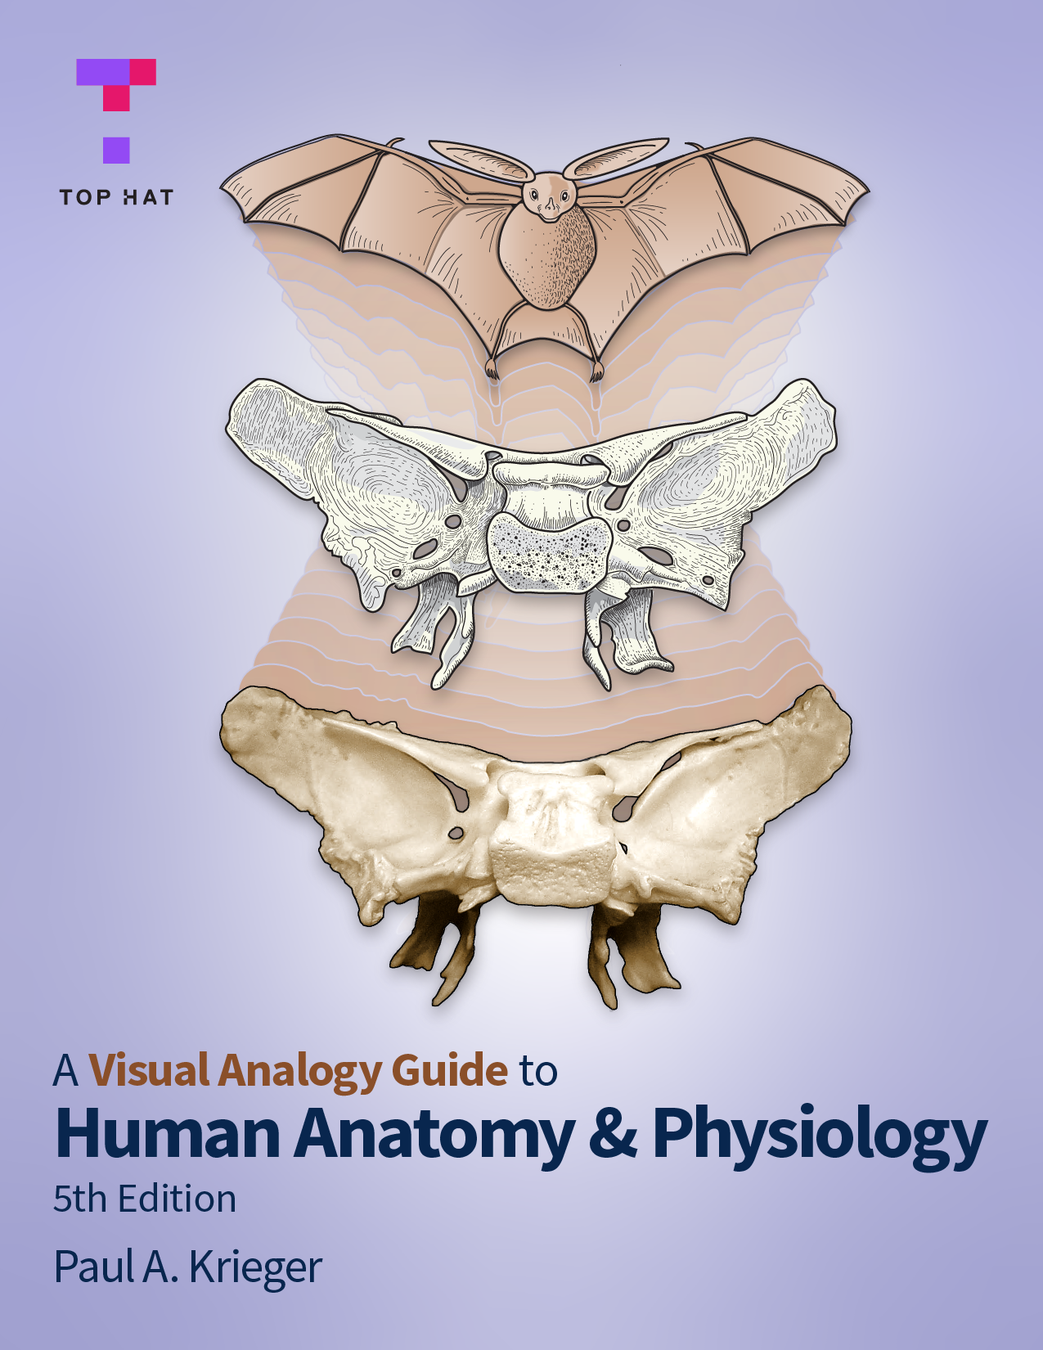 A Visual Analogy Guide to Human Anatomy & Physiology, 5th Edition (Sample) cover photo